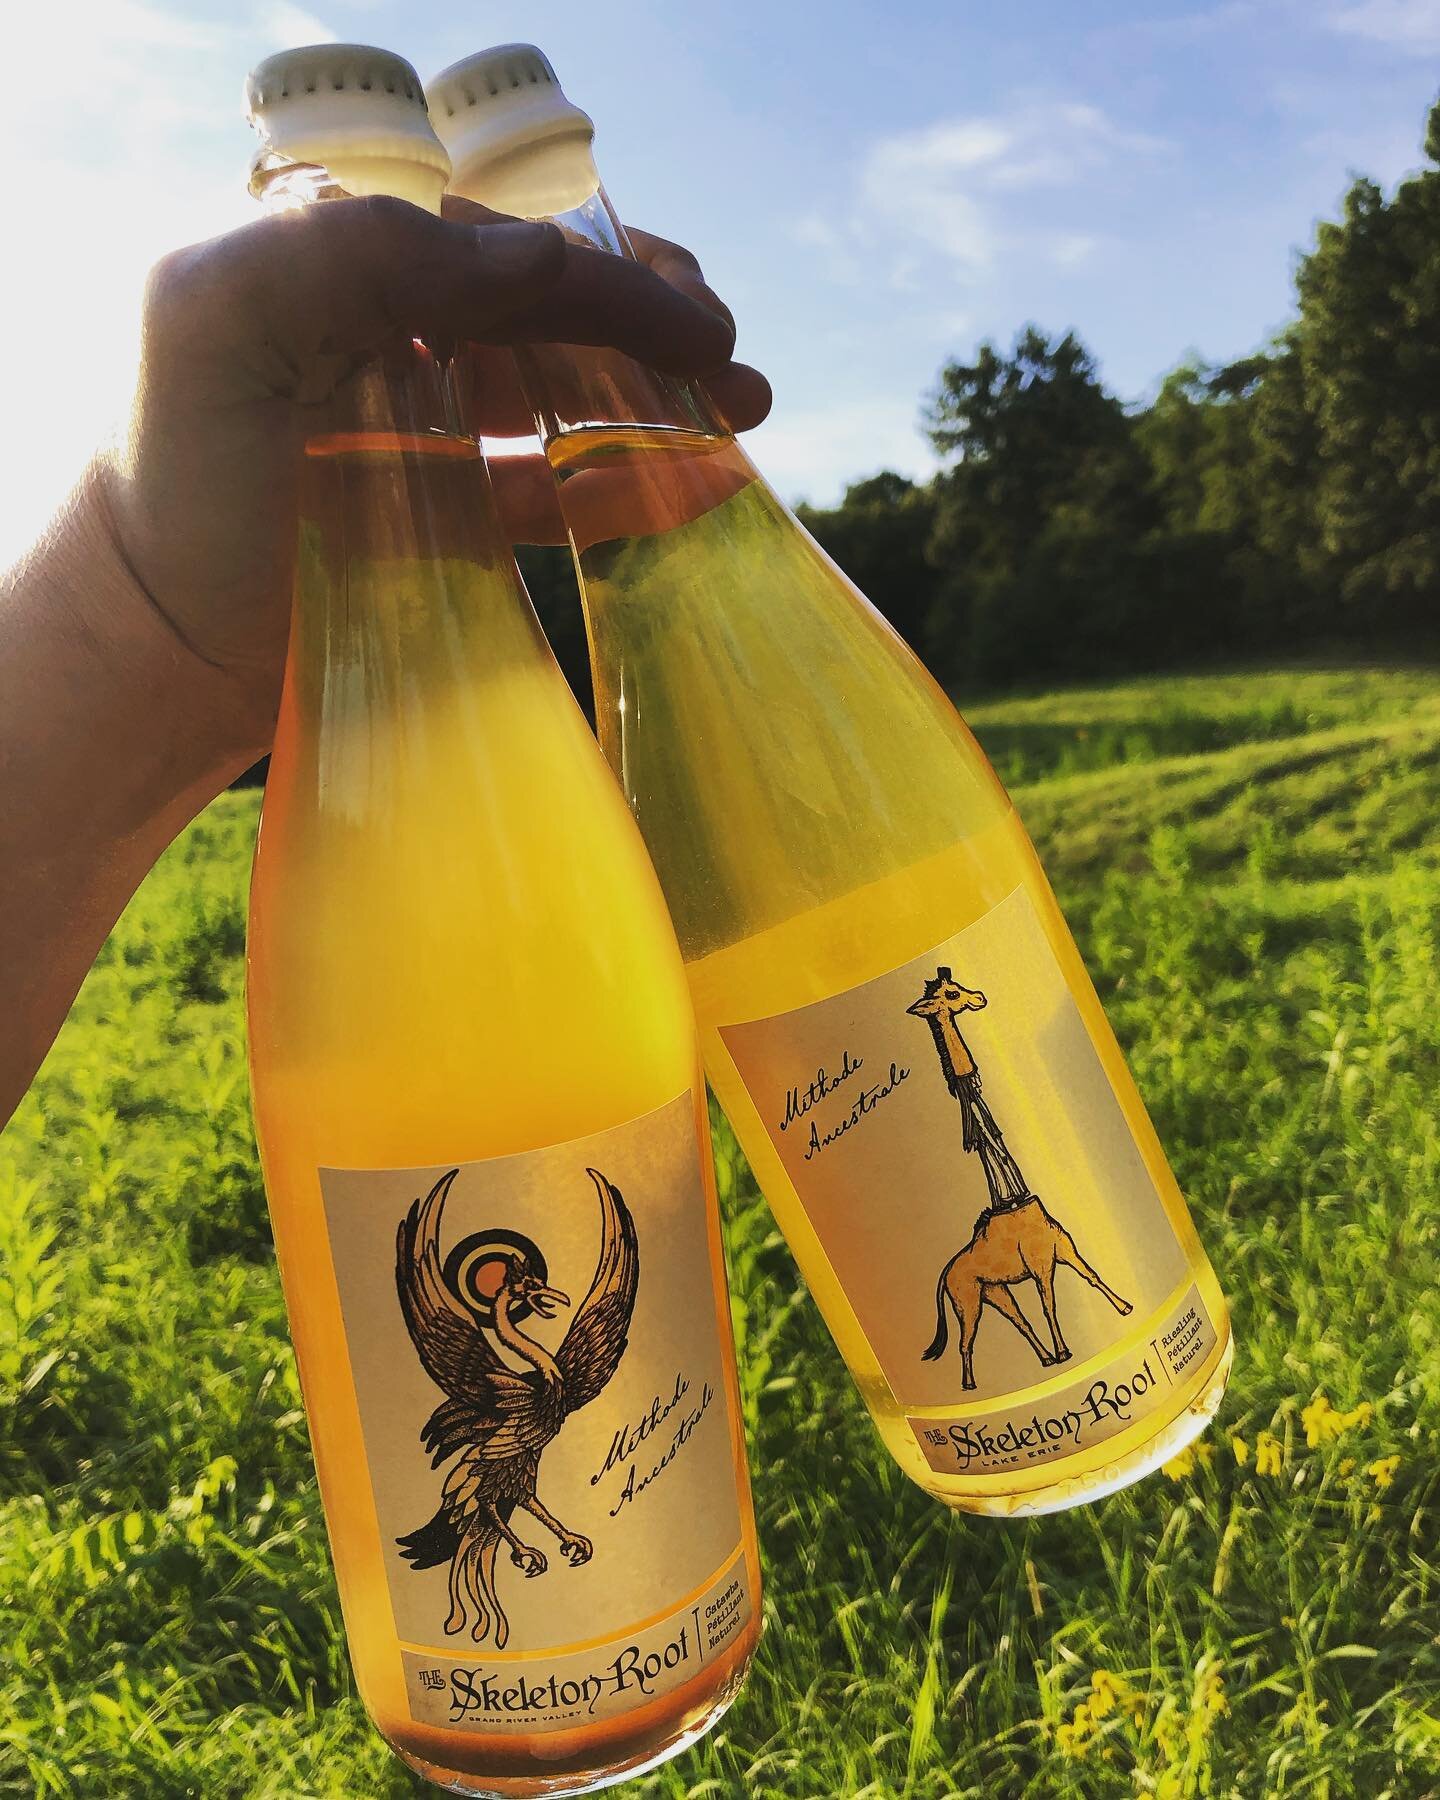 ✨ Holiday weekend sparklers!  Fresh Catawba &amp; Riesling P&eacute;t Nat to help you soak up the last bit of summer. 

Open 4-10 today &amp; regular hours all weekend.  Wine with us &amp; snag those holiday bottles 🥂!
.
.
#summersessions #holidaywi